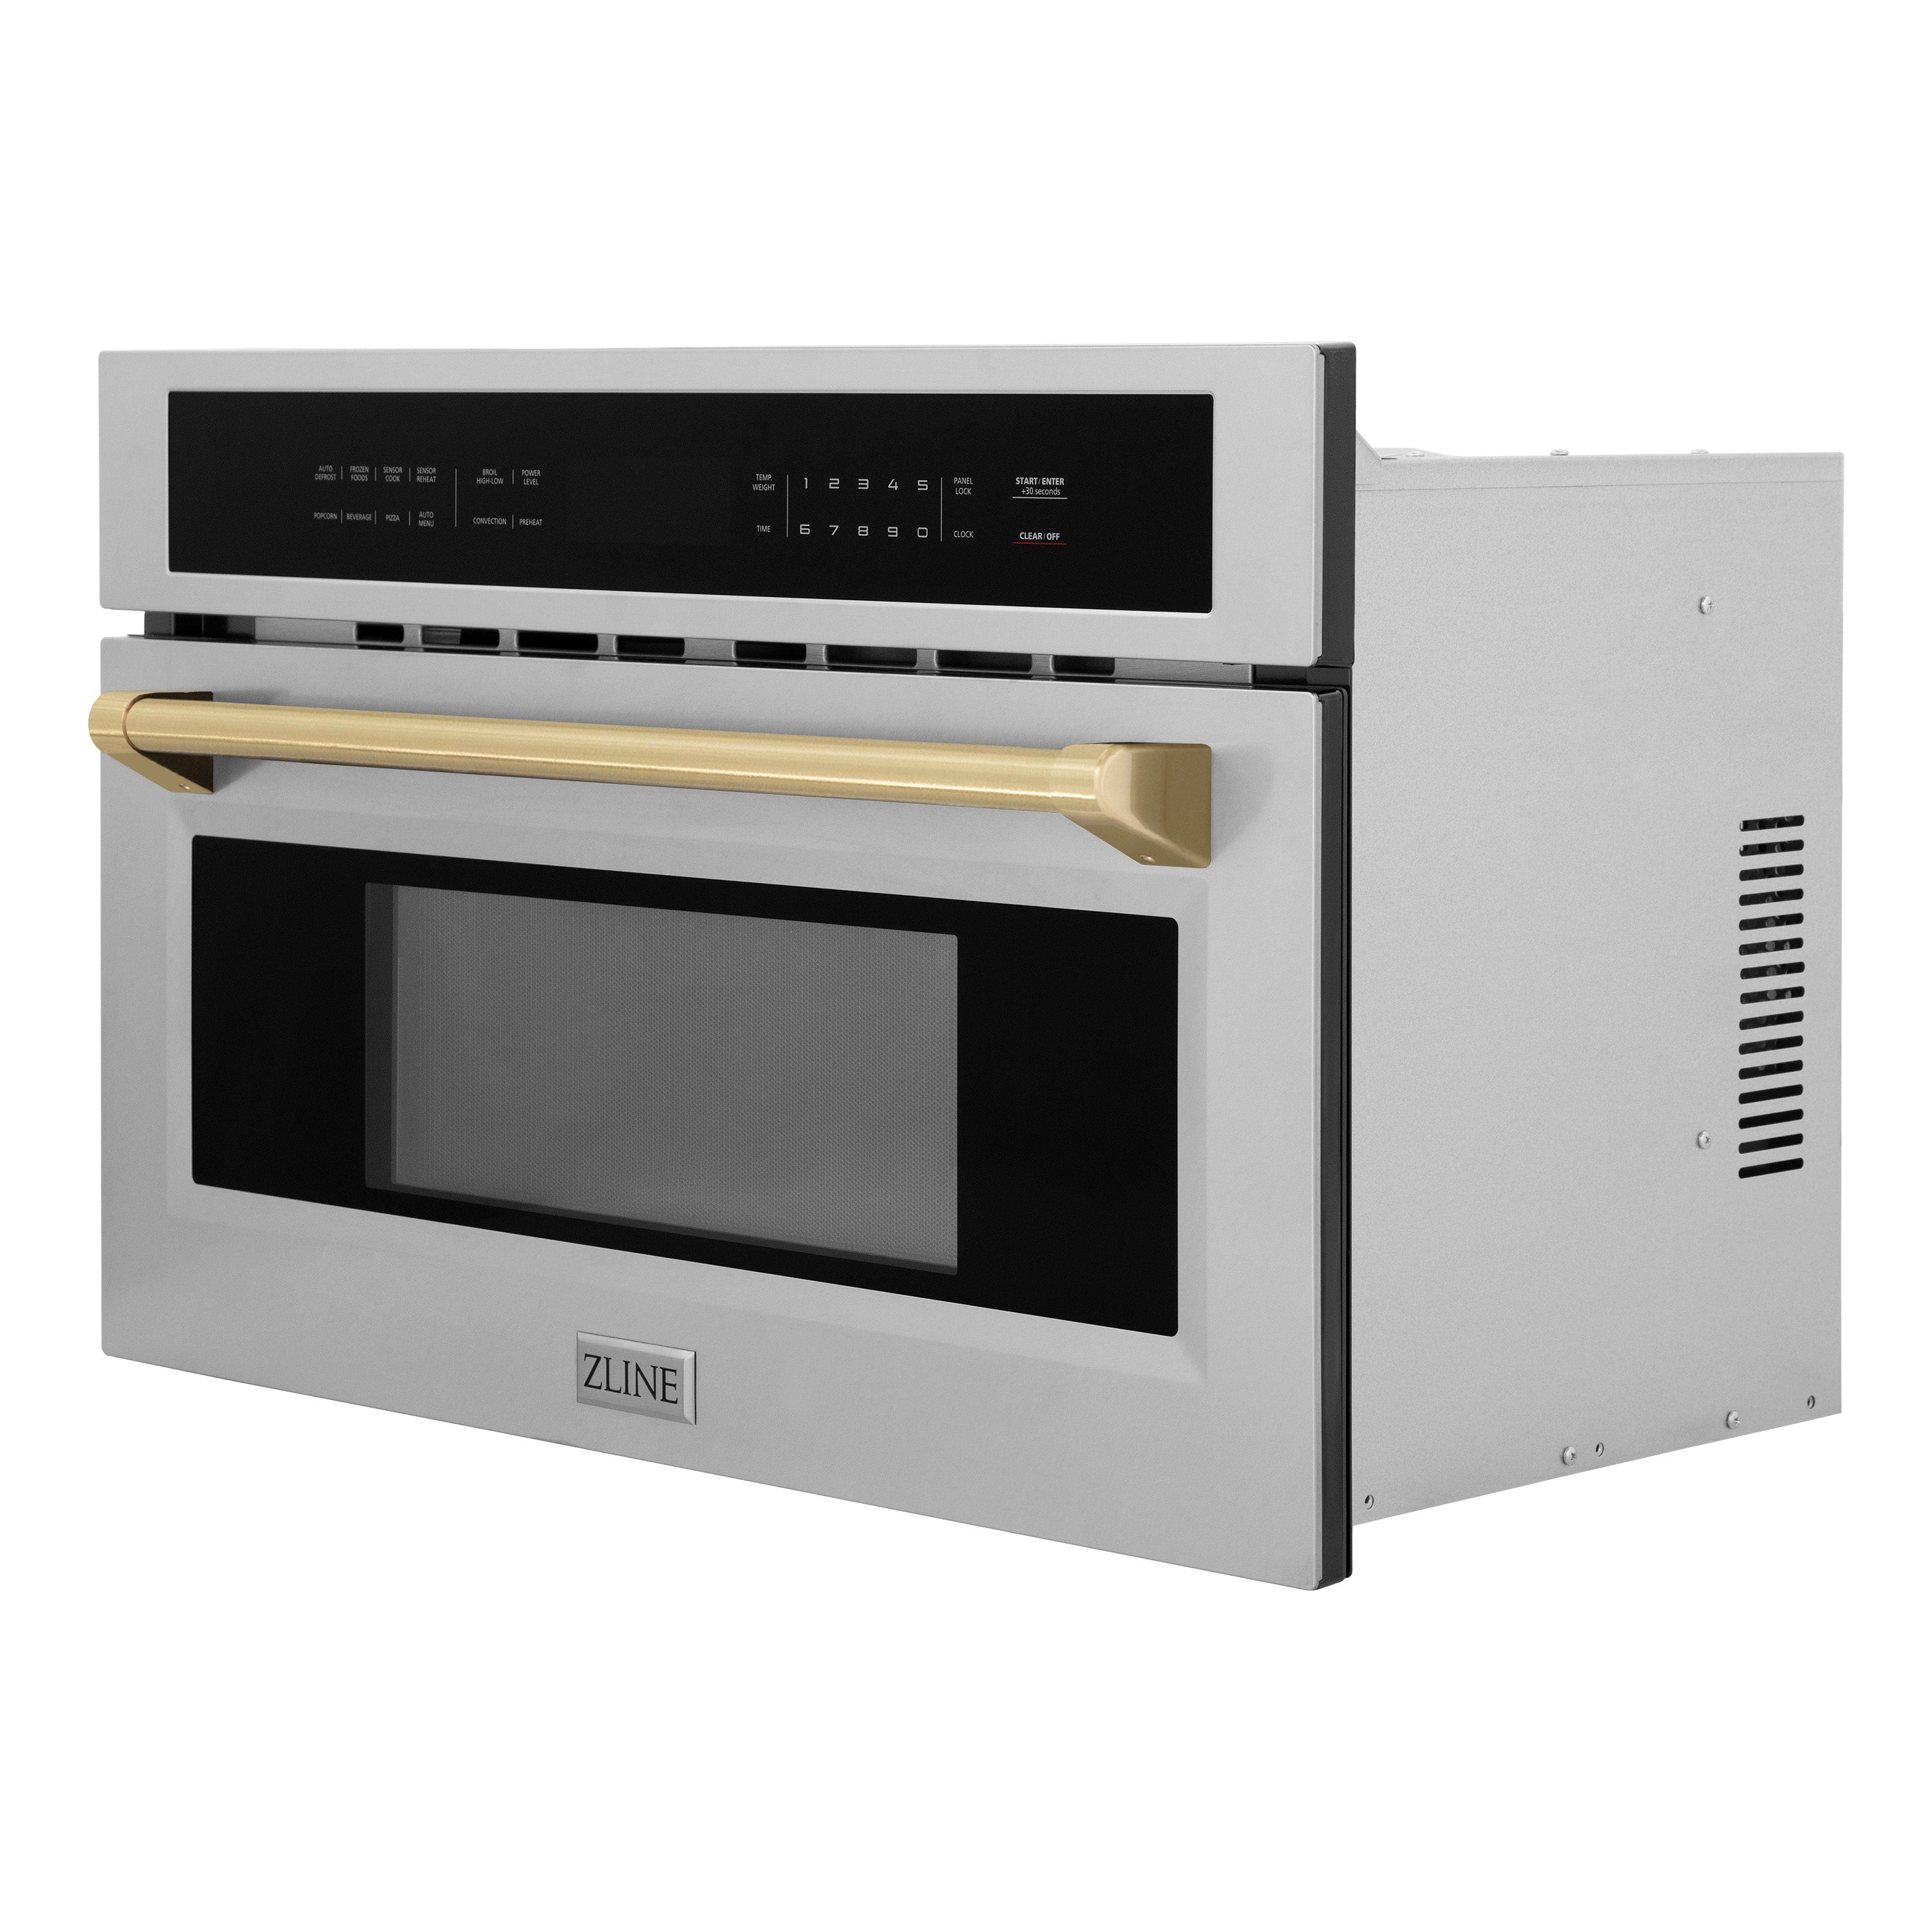 ZLINE Autograph Edition 30 in. 1.6 cu ft. Built-in Convection Microwave Oven in Stainless Steel with Champagne Bronze Accents (MWOZ-30-CB) Side View Door Closed